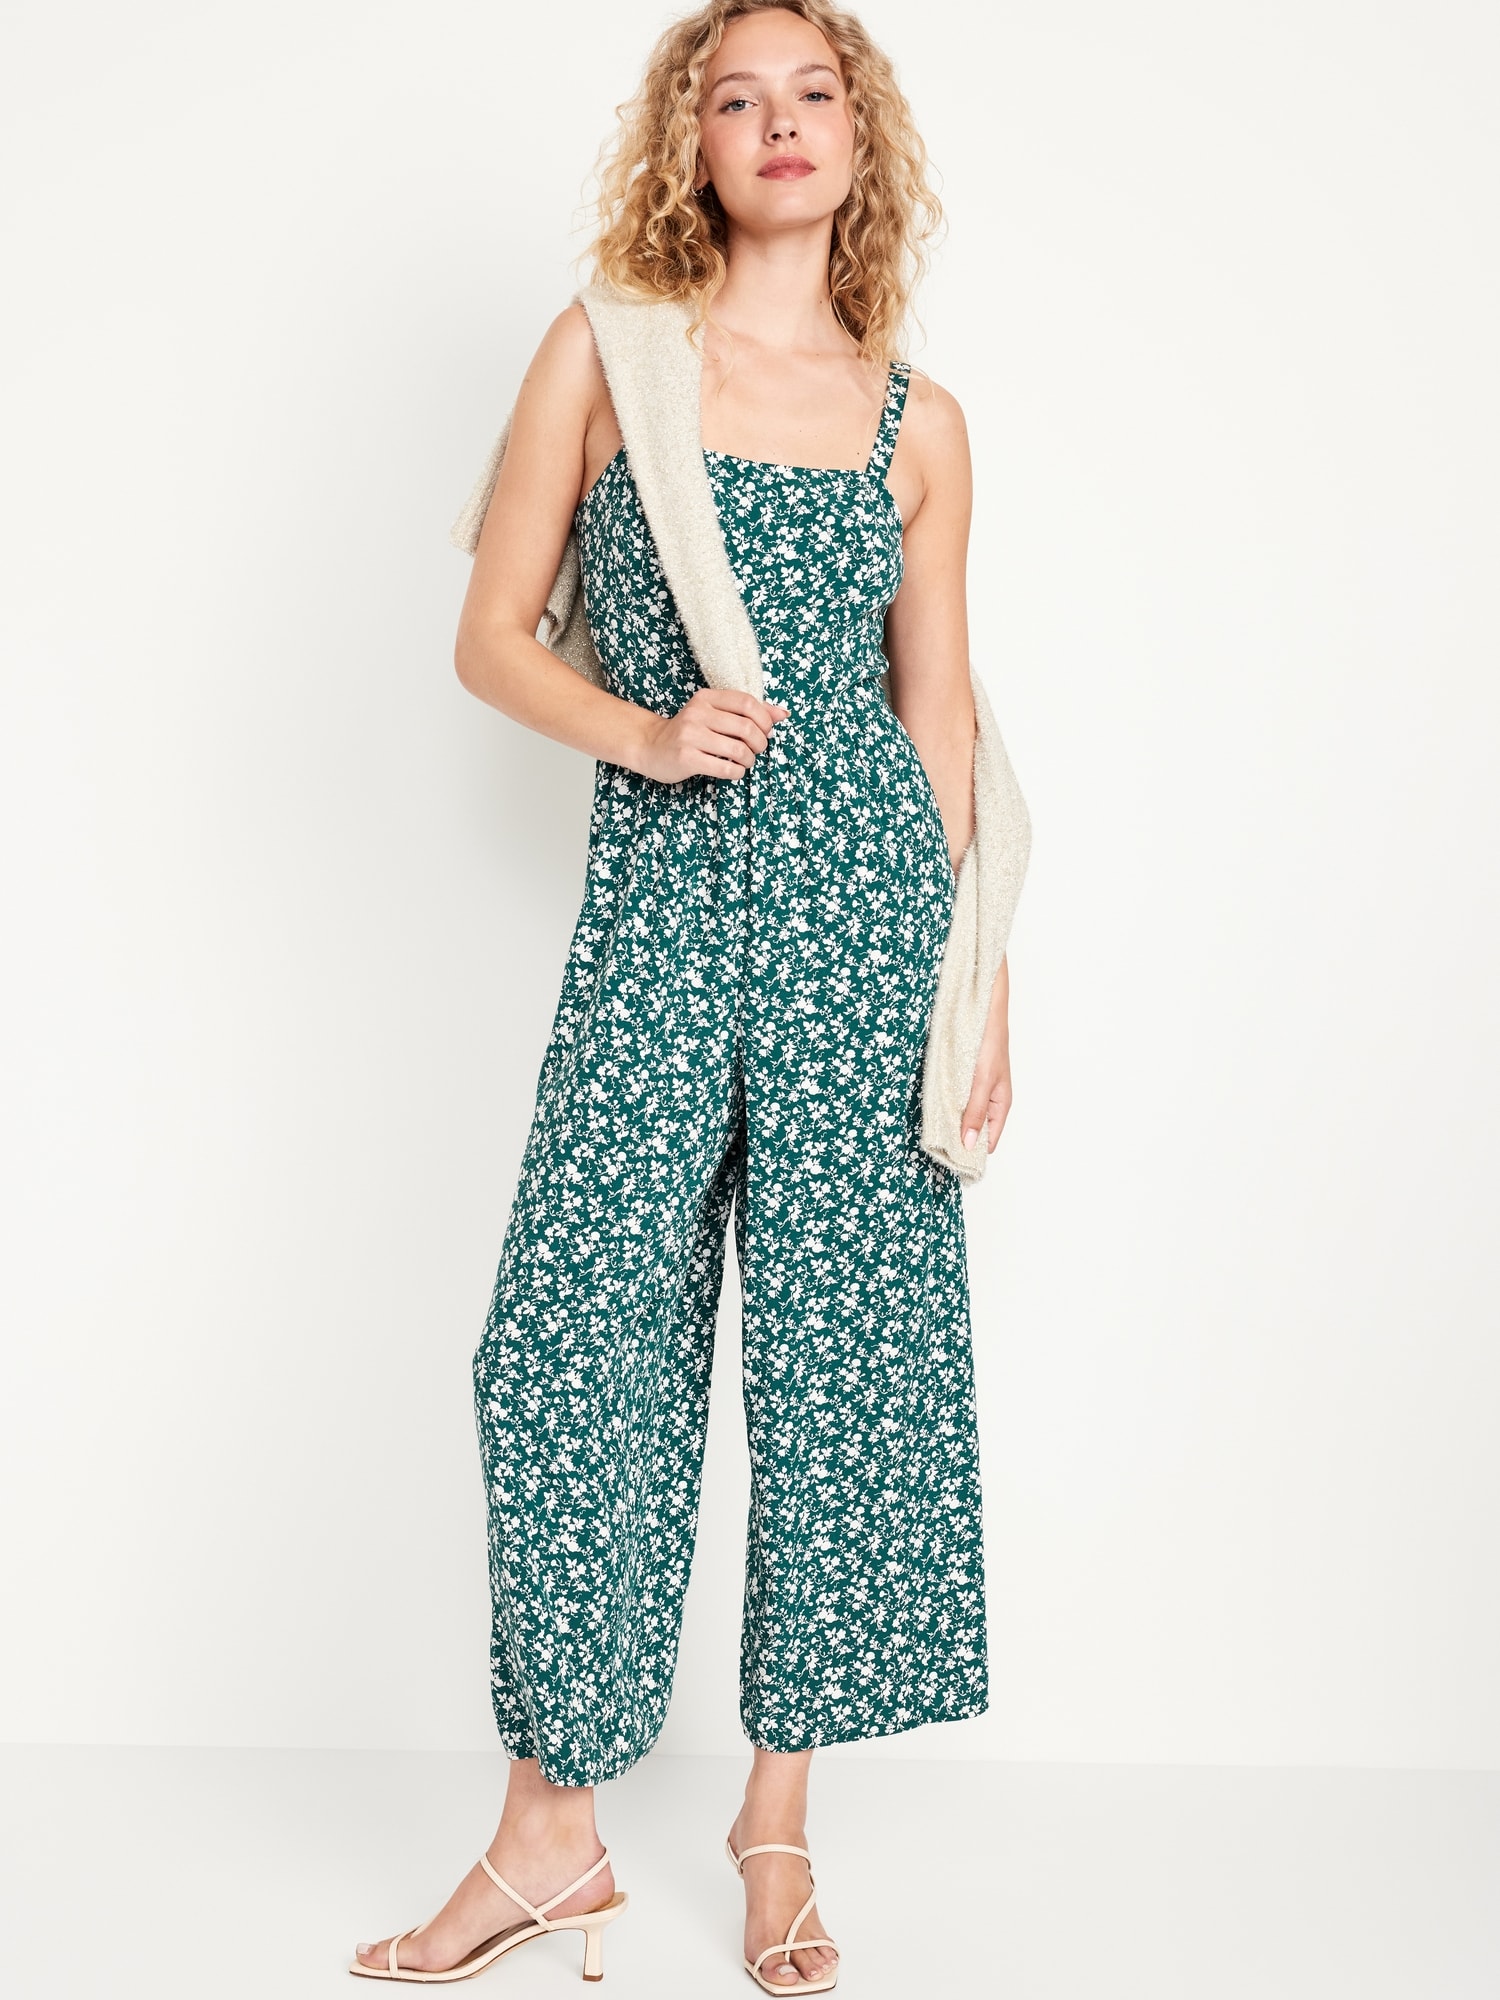 Fit & Flare Cami Jumpsuit | Old Navy